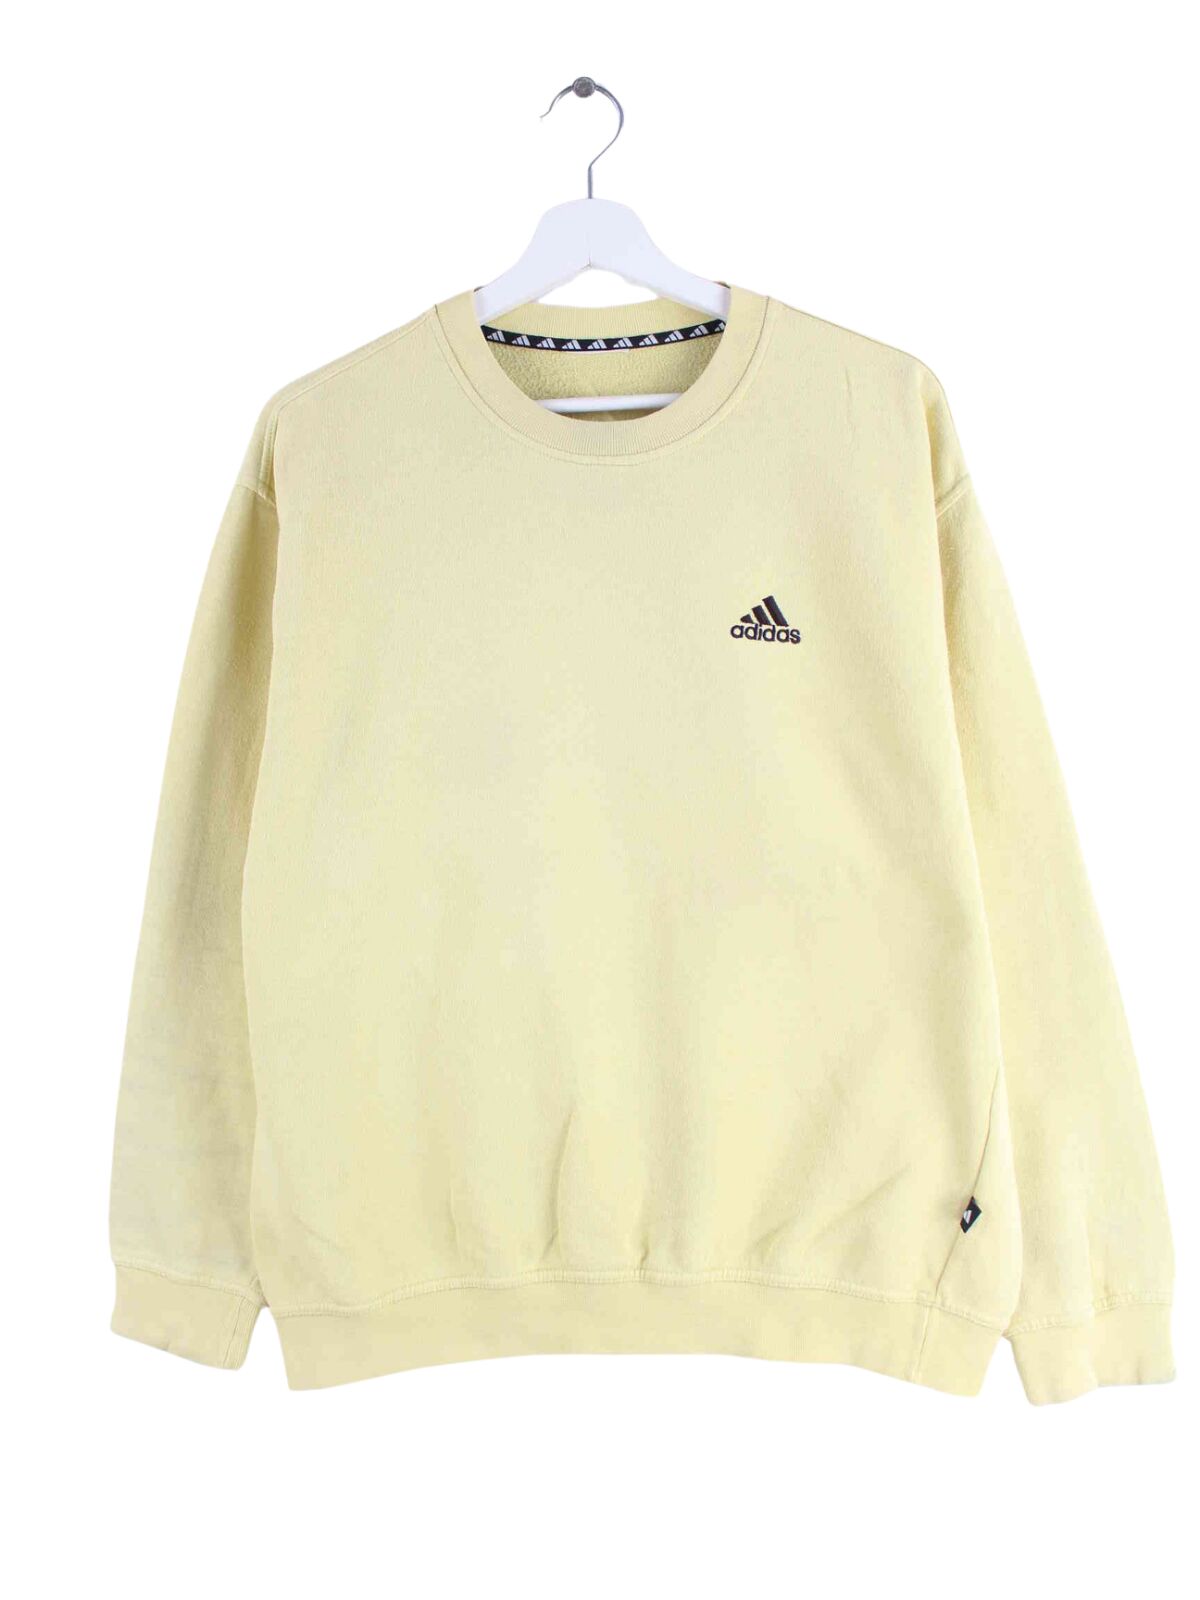 Adidas 90s Vintage Embroidered Sweater Gelb S (front image)